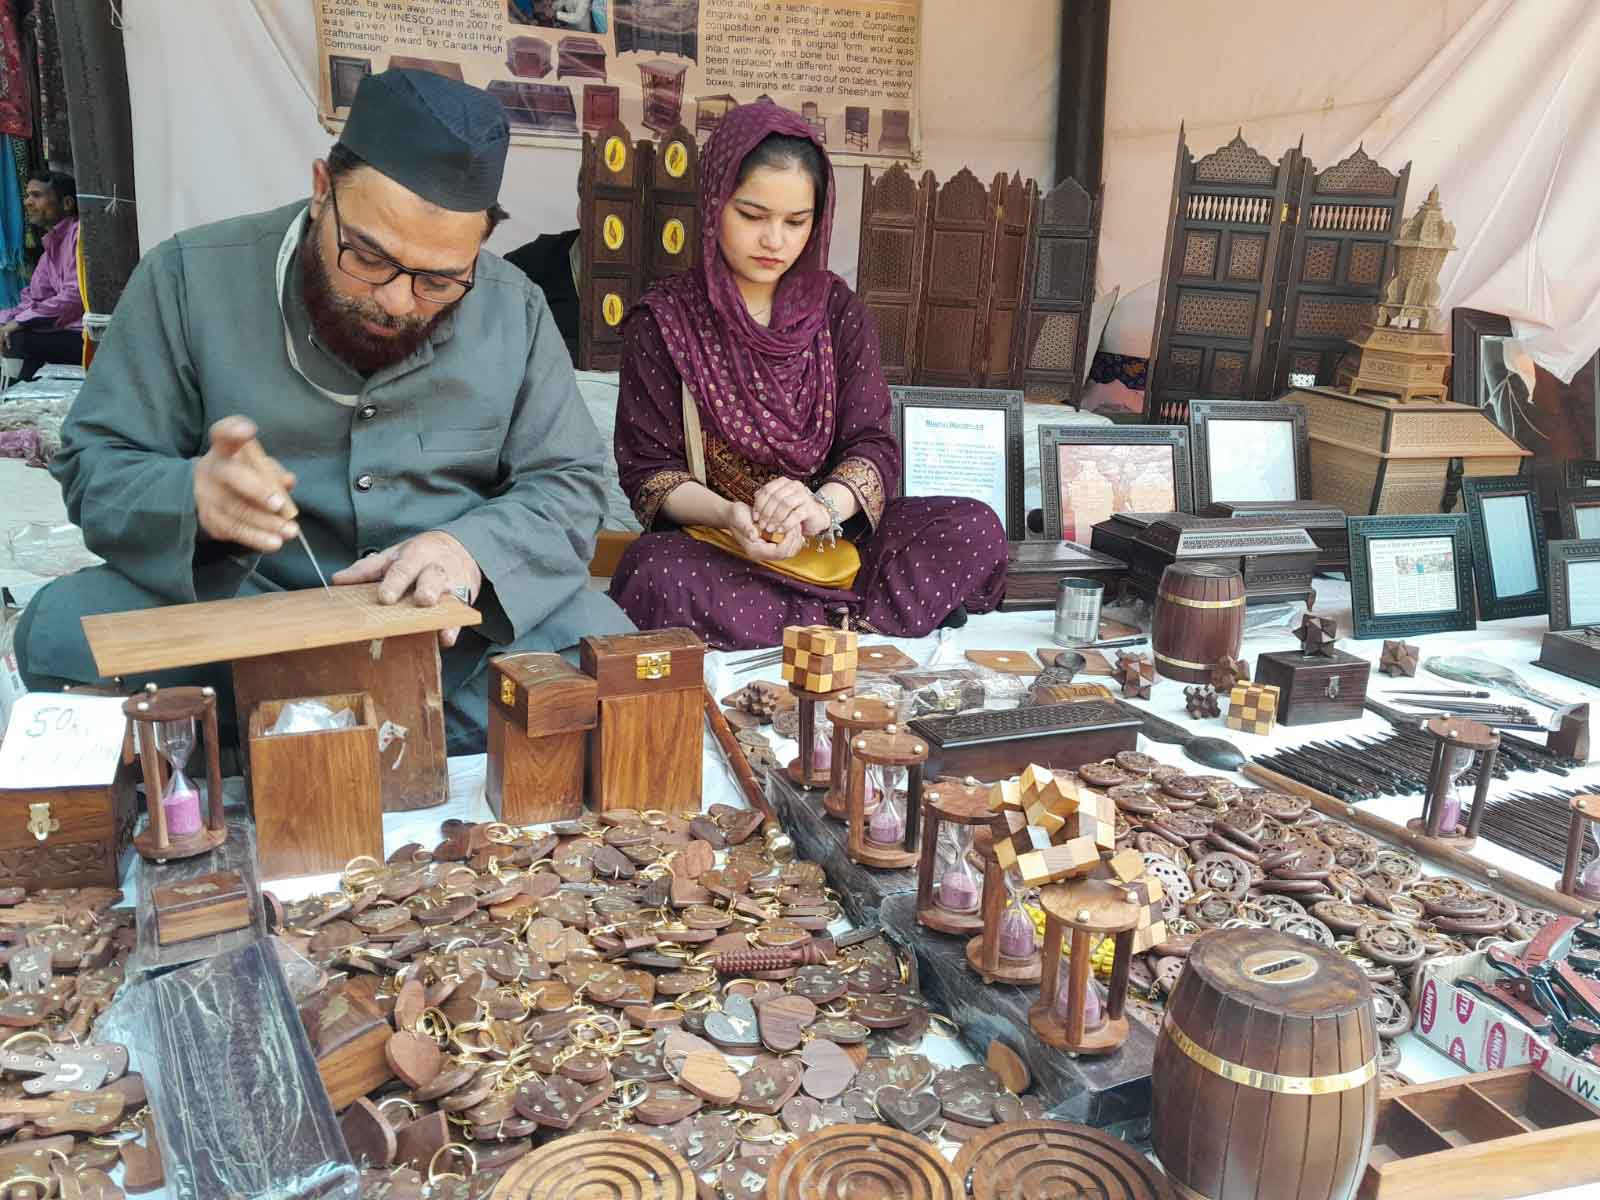 https://www.hindi.awazthevoice.in/upload/news/167836045802_Indian_craftmen_Mohd_Matlub_filled_the_chillum,_massaged,_then_became_a_craftsman,_many_diplomats_are_admirers_of_his_art_3.jpg